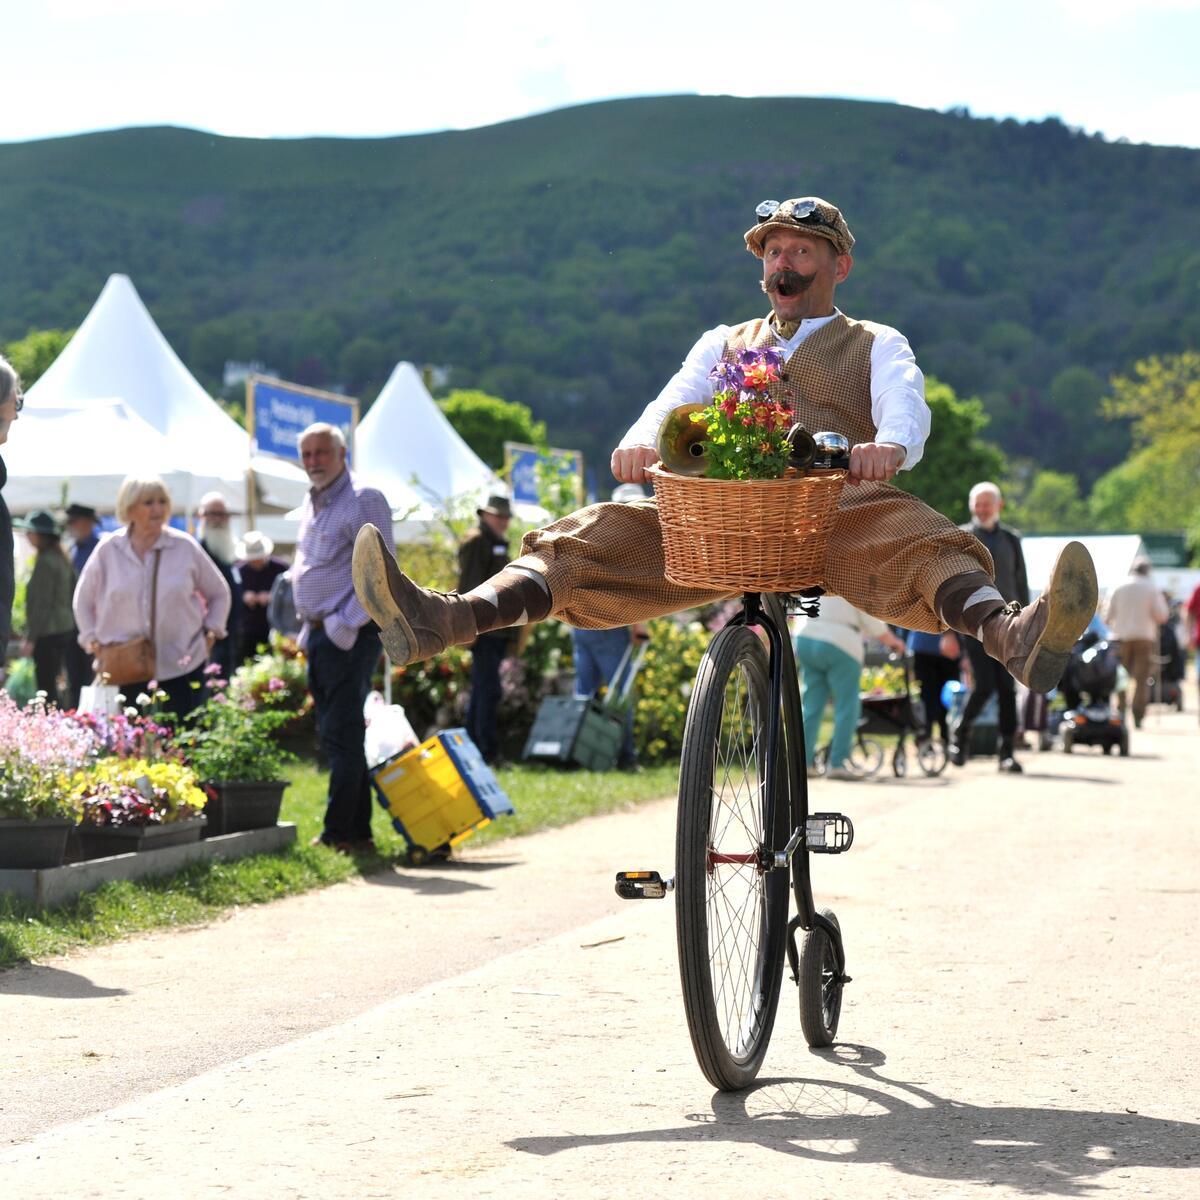 Man on a bicycle with feel in the air and flowers